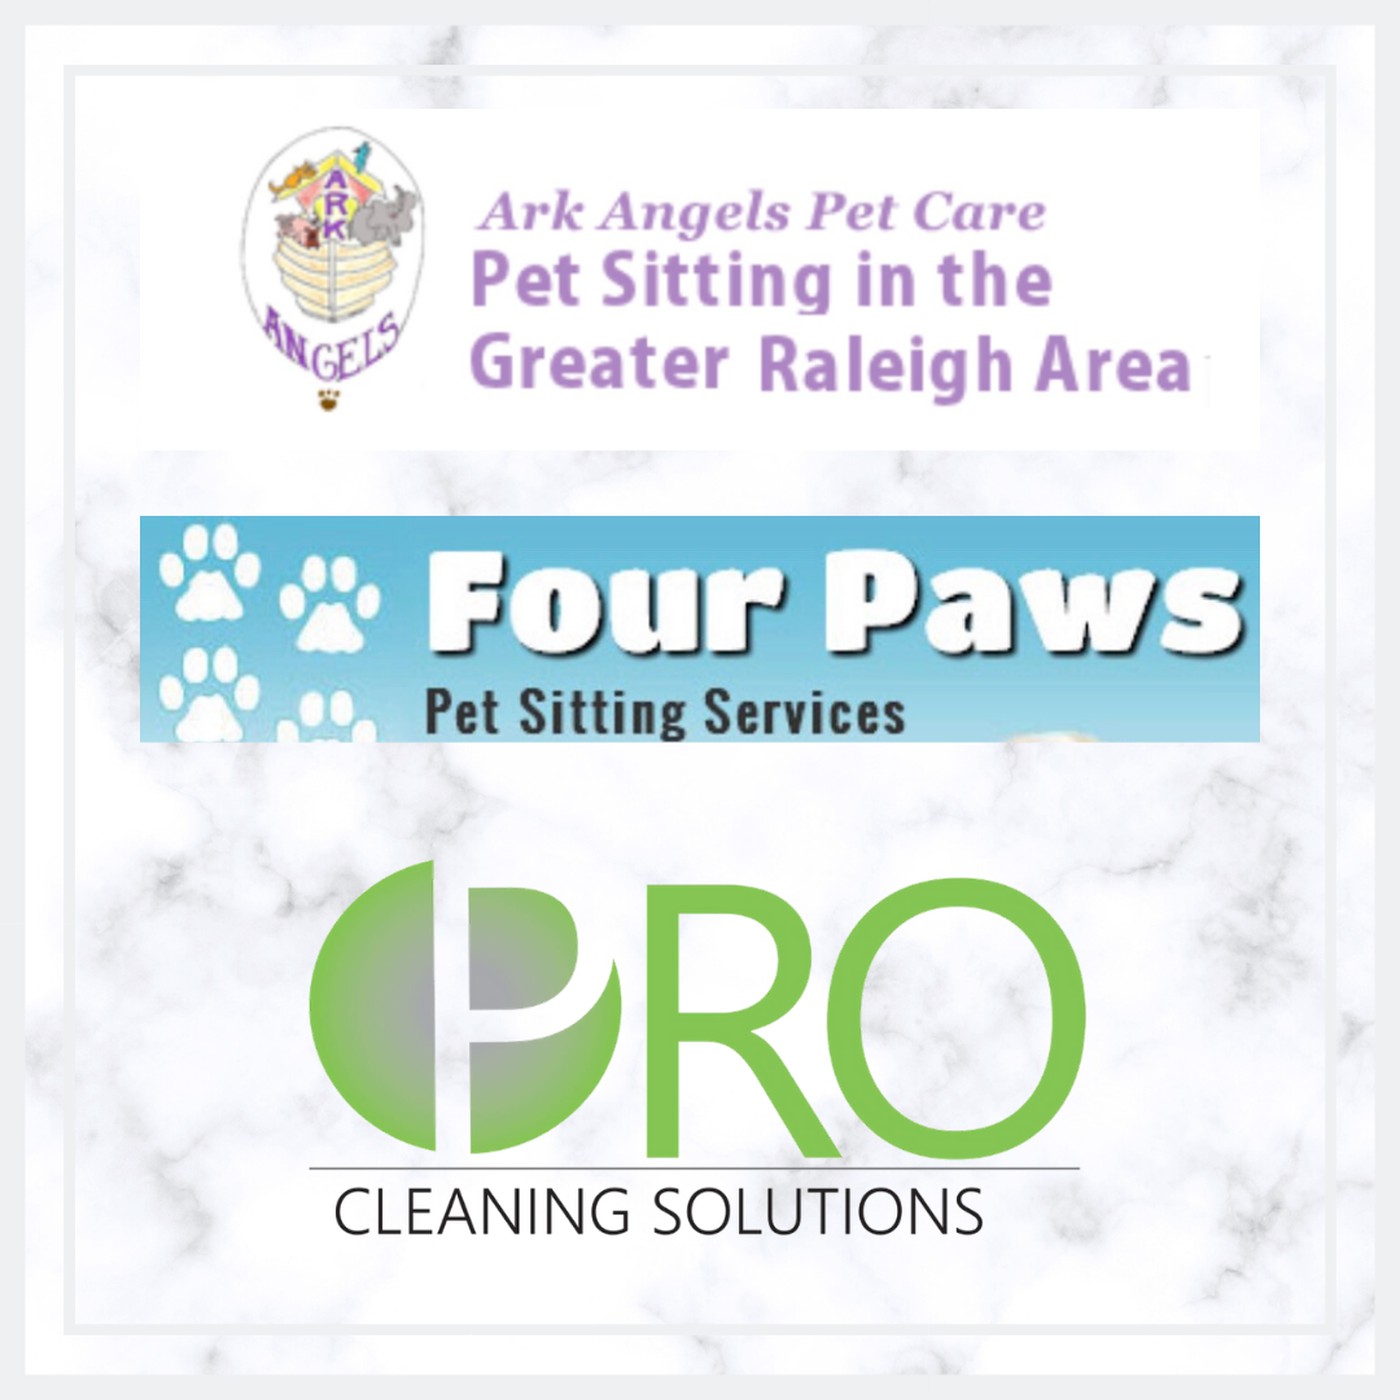 Pro Cleaning Solutions - Four Paws Petsitting - Ark Angles Pet Care